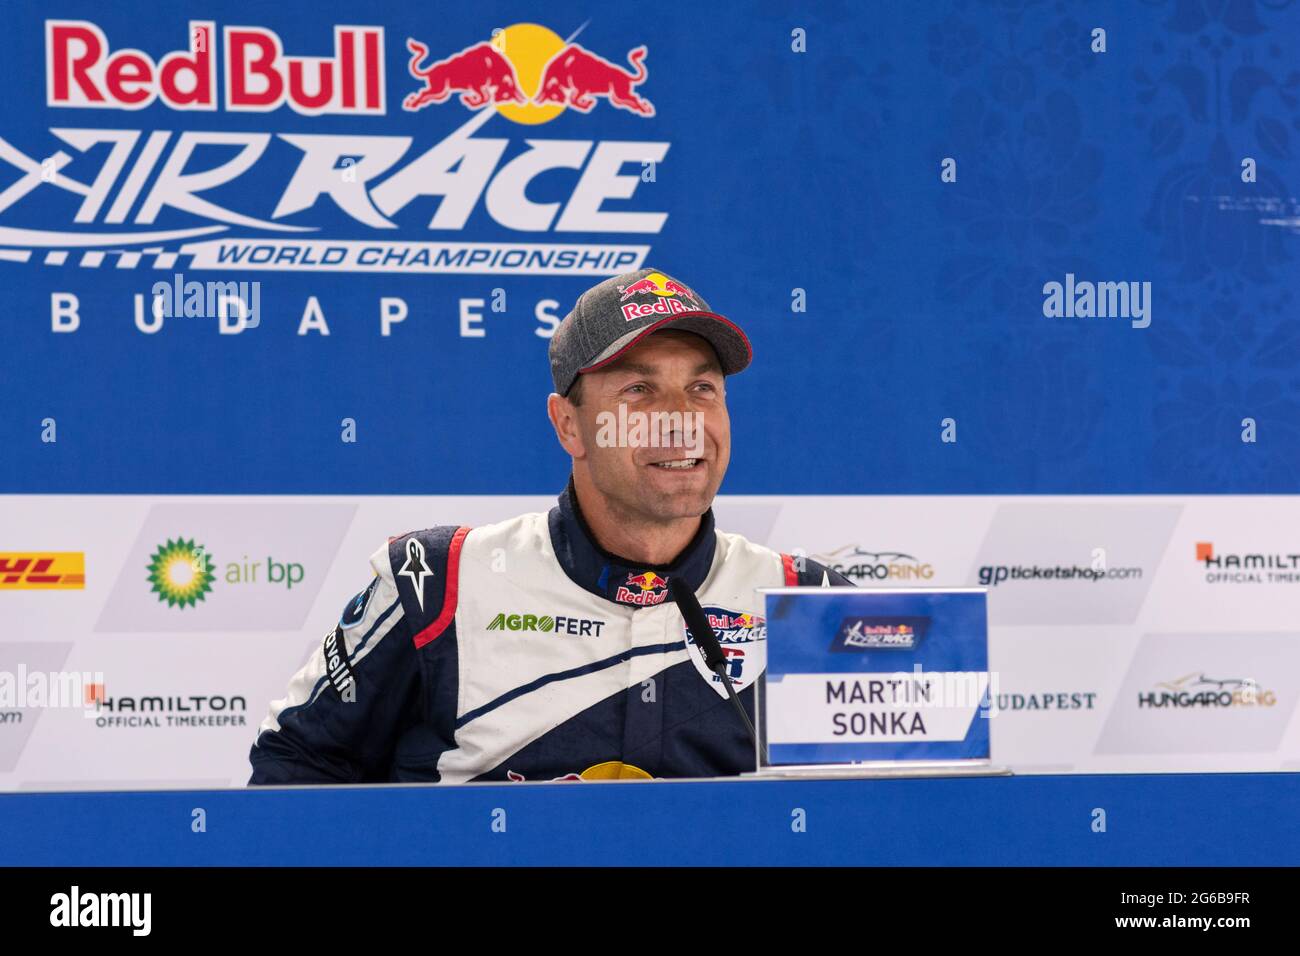 Budapest, Hungary - June 23, 2018: Martin Sonka smiling during press conference at Red Bull Air Race (The World Air Sports Federation event) Stock Photo